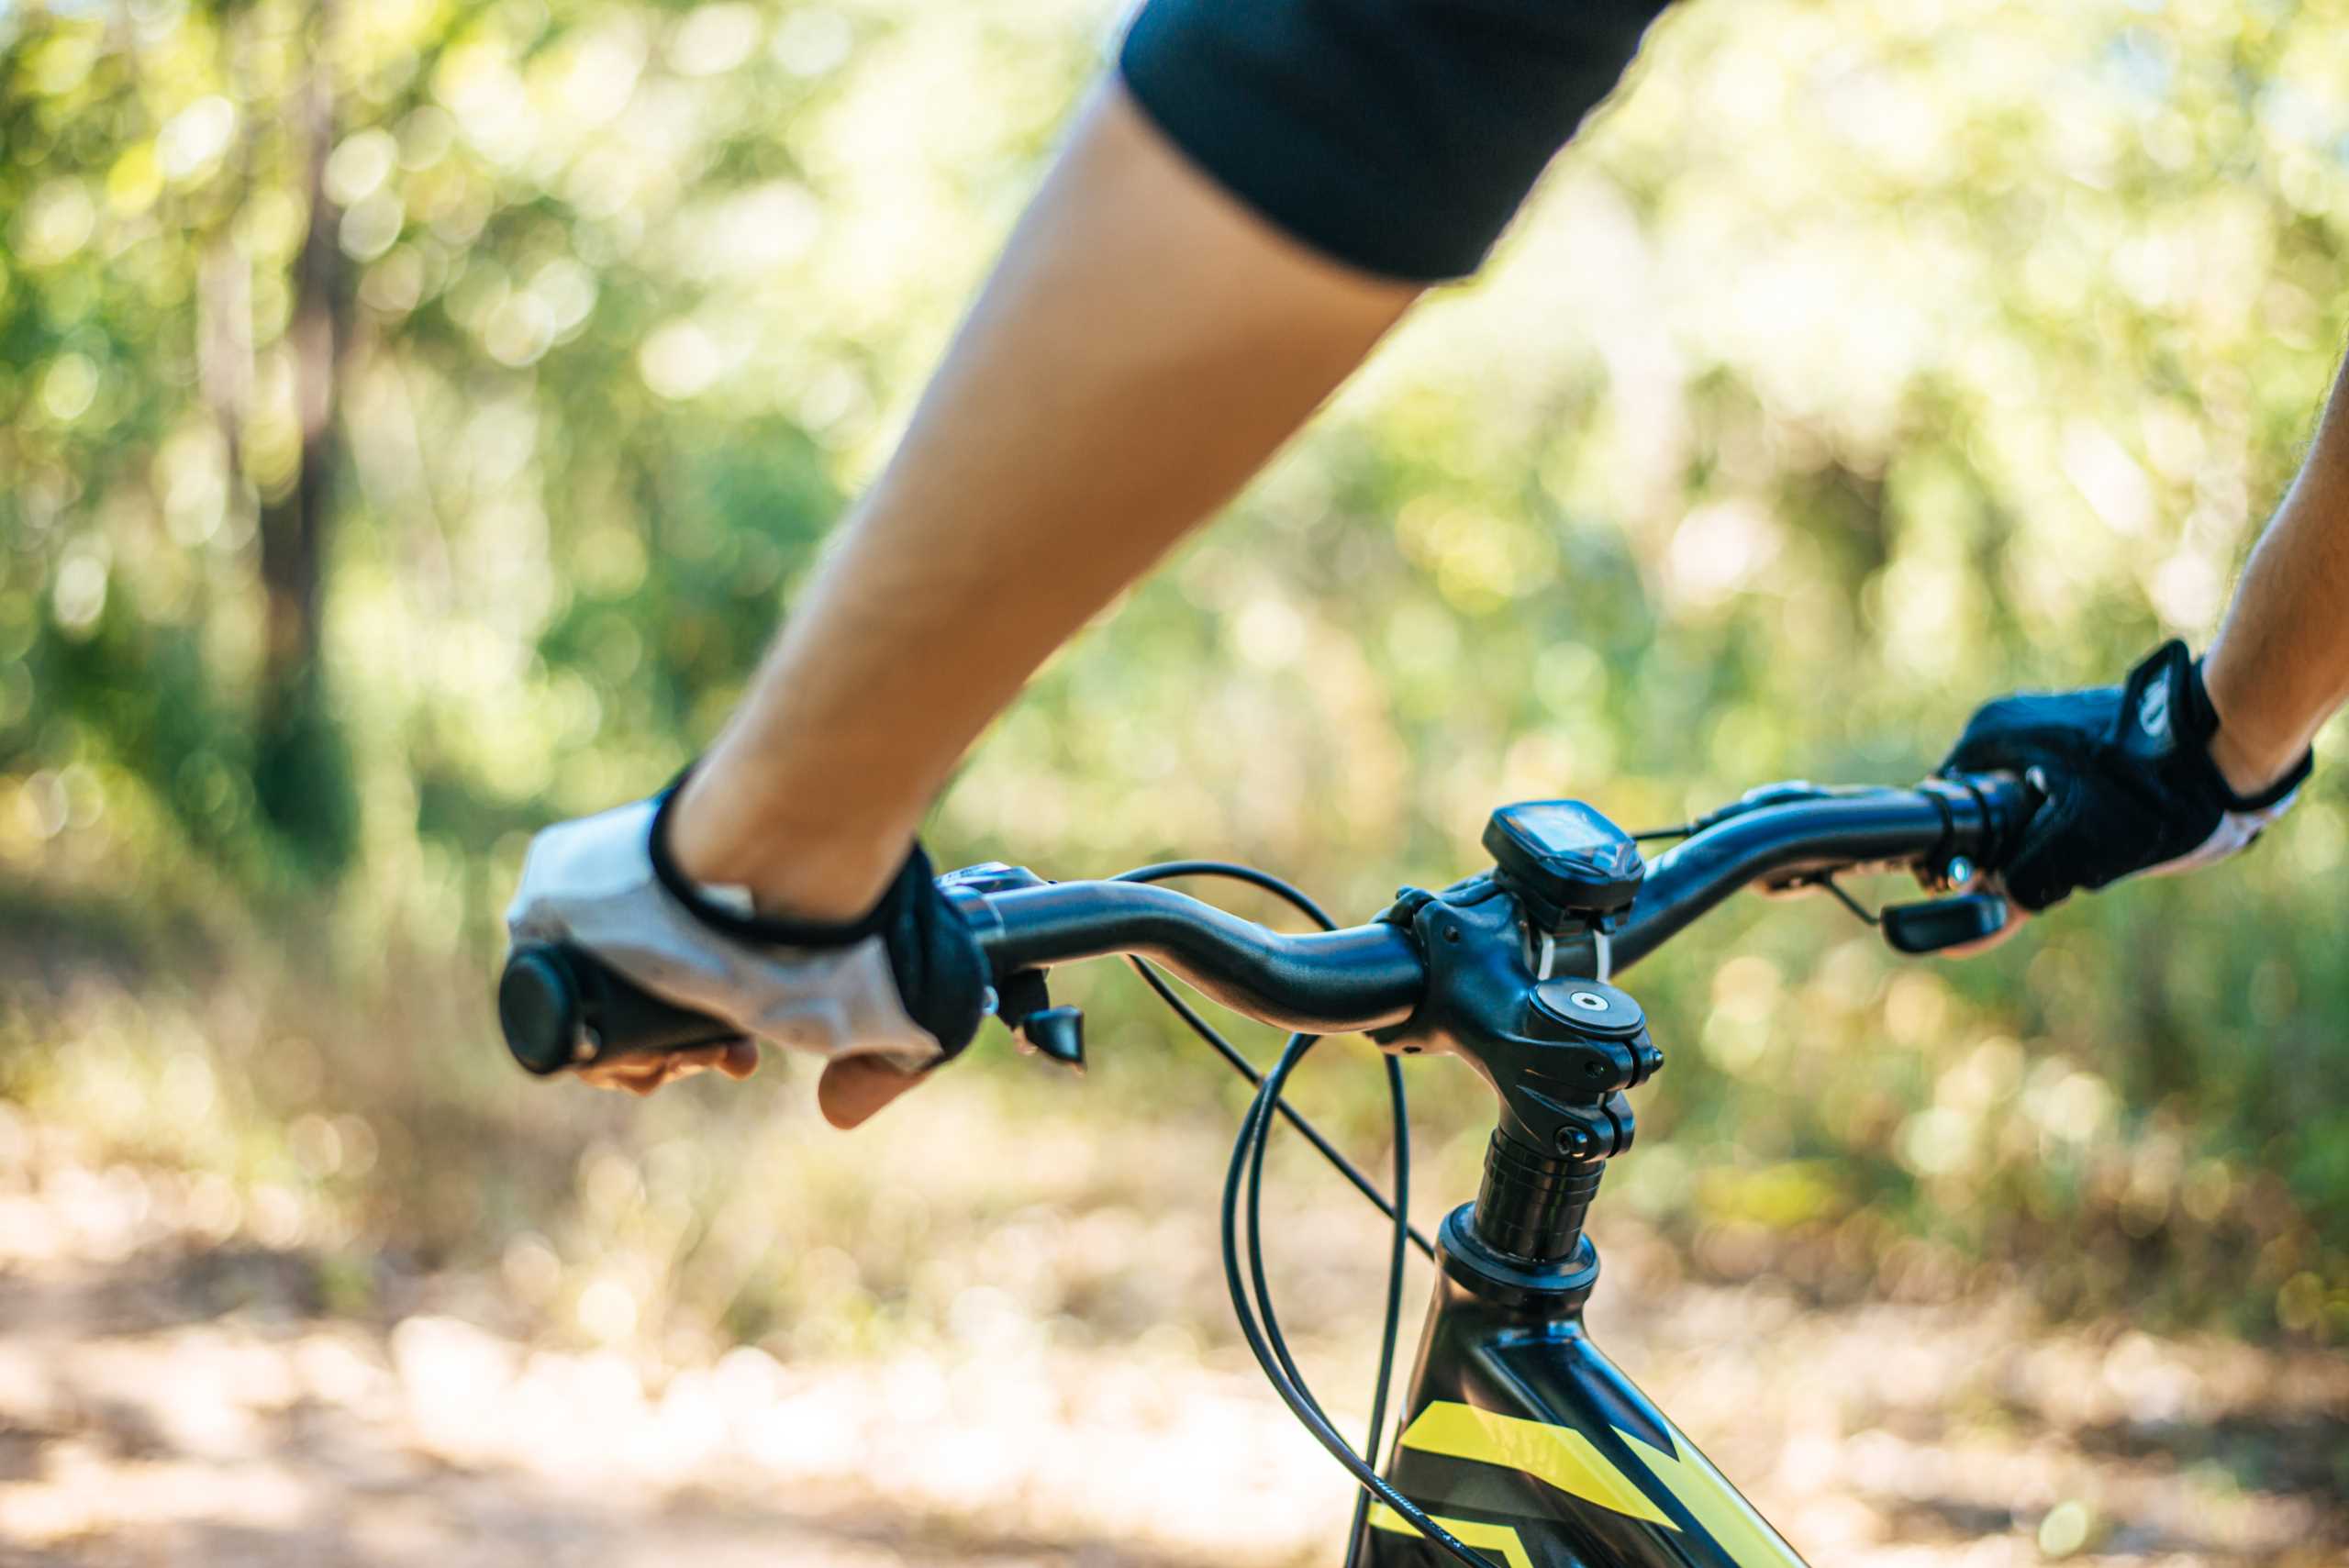 Mountain cyclists grasp the bike handle, focusing on the bicycle neck